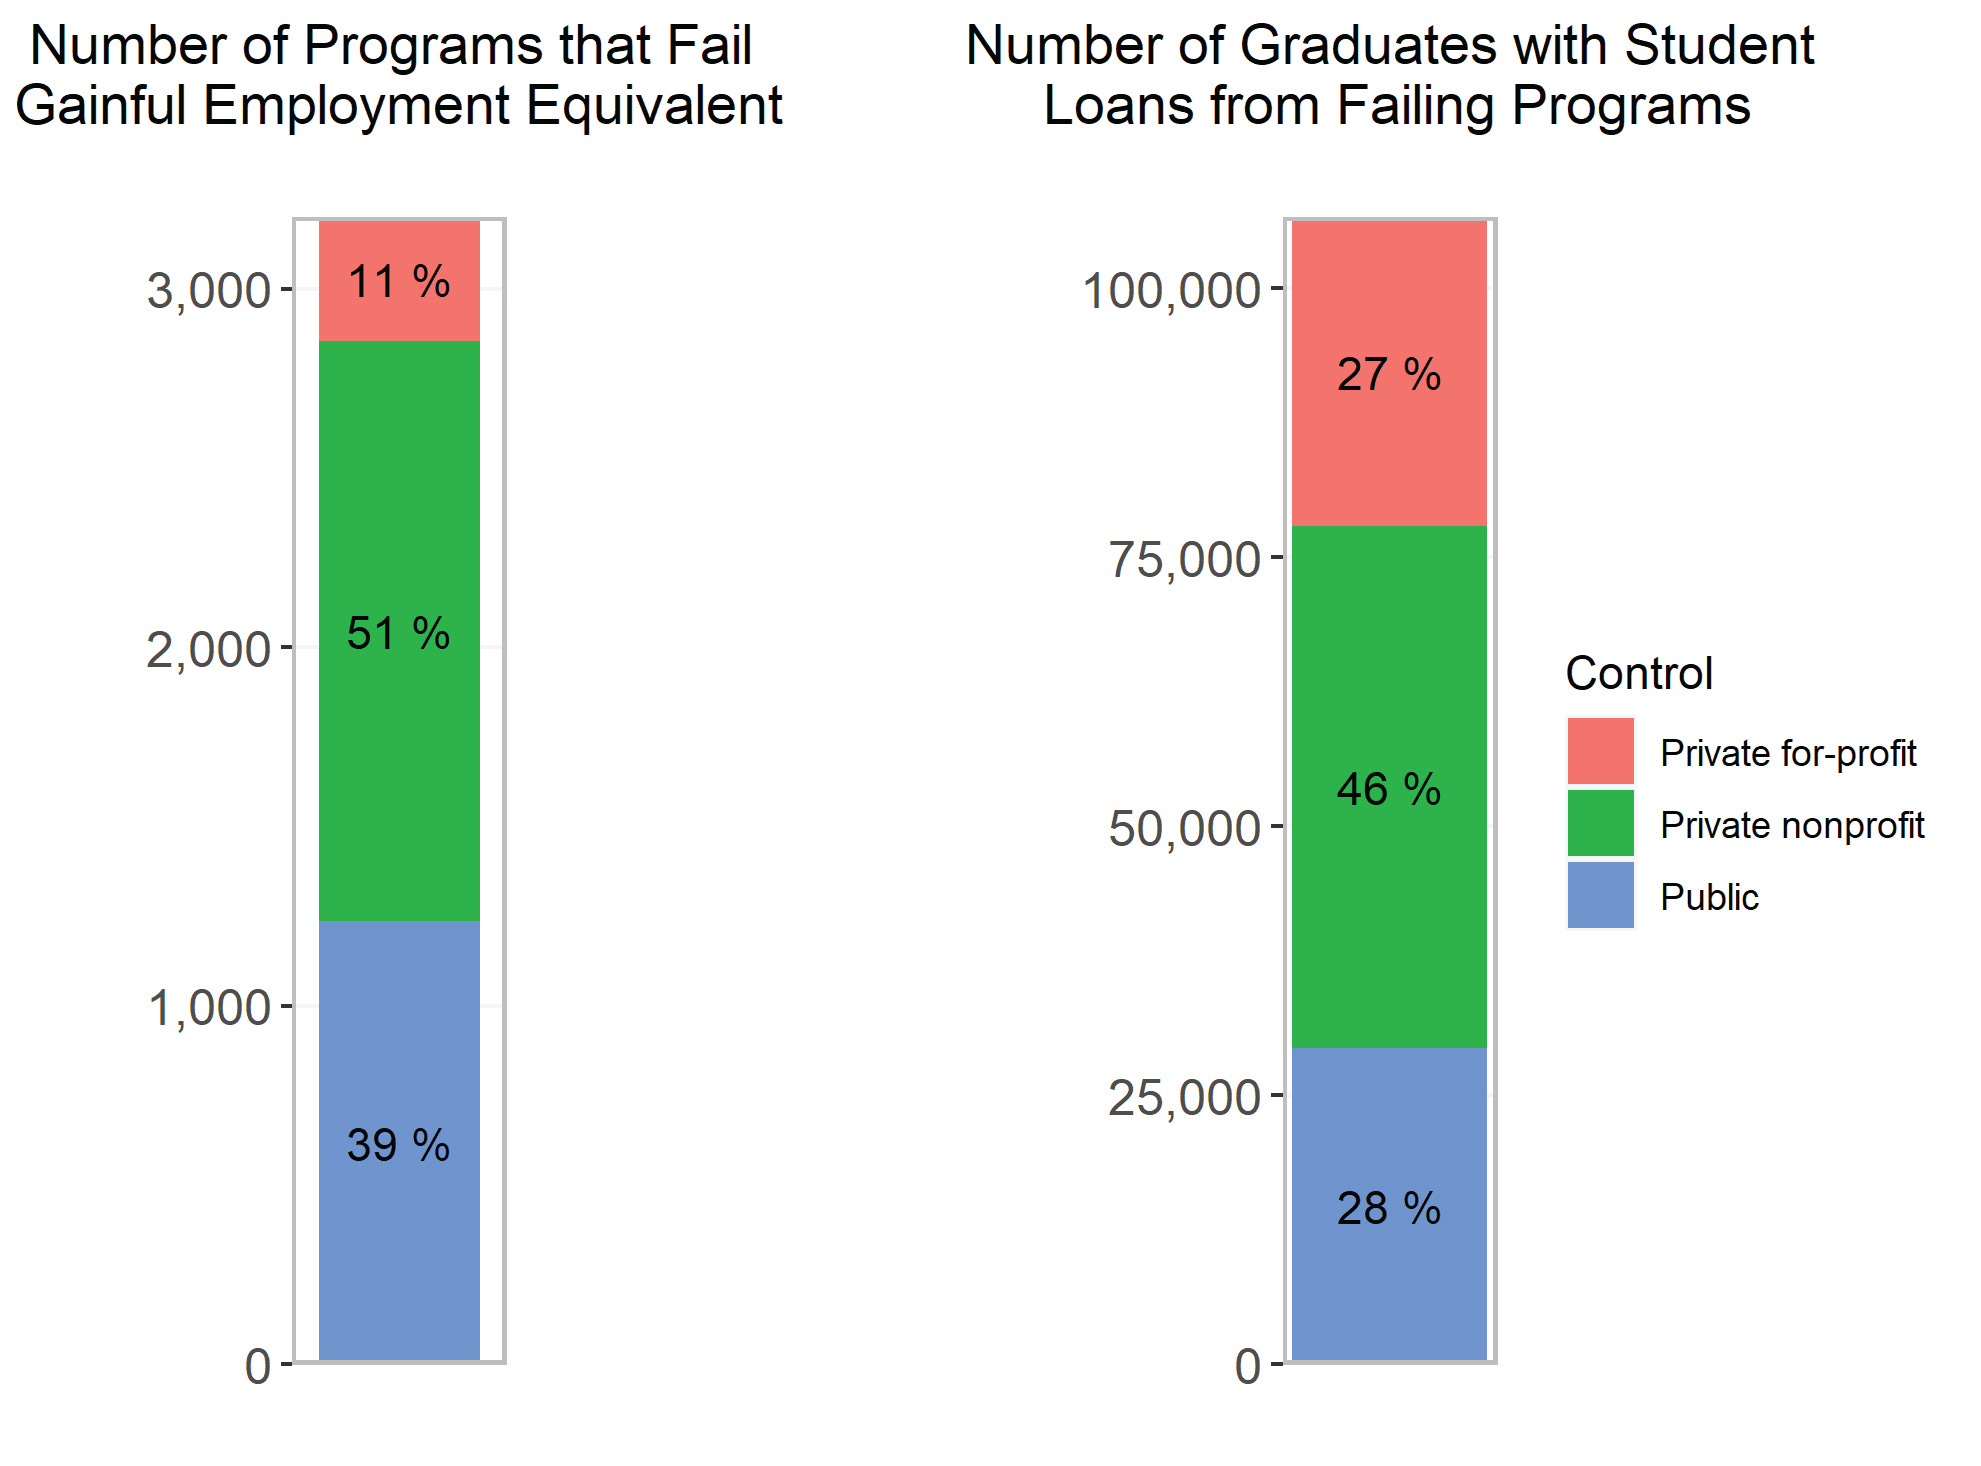 Figure 4, The Number of Programs that Fail Gainful Employment Equivalent and the Number of Graduates with Loans Graduating from Those Programs